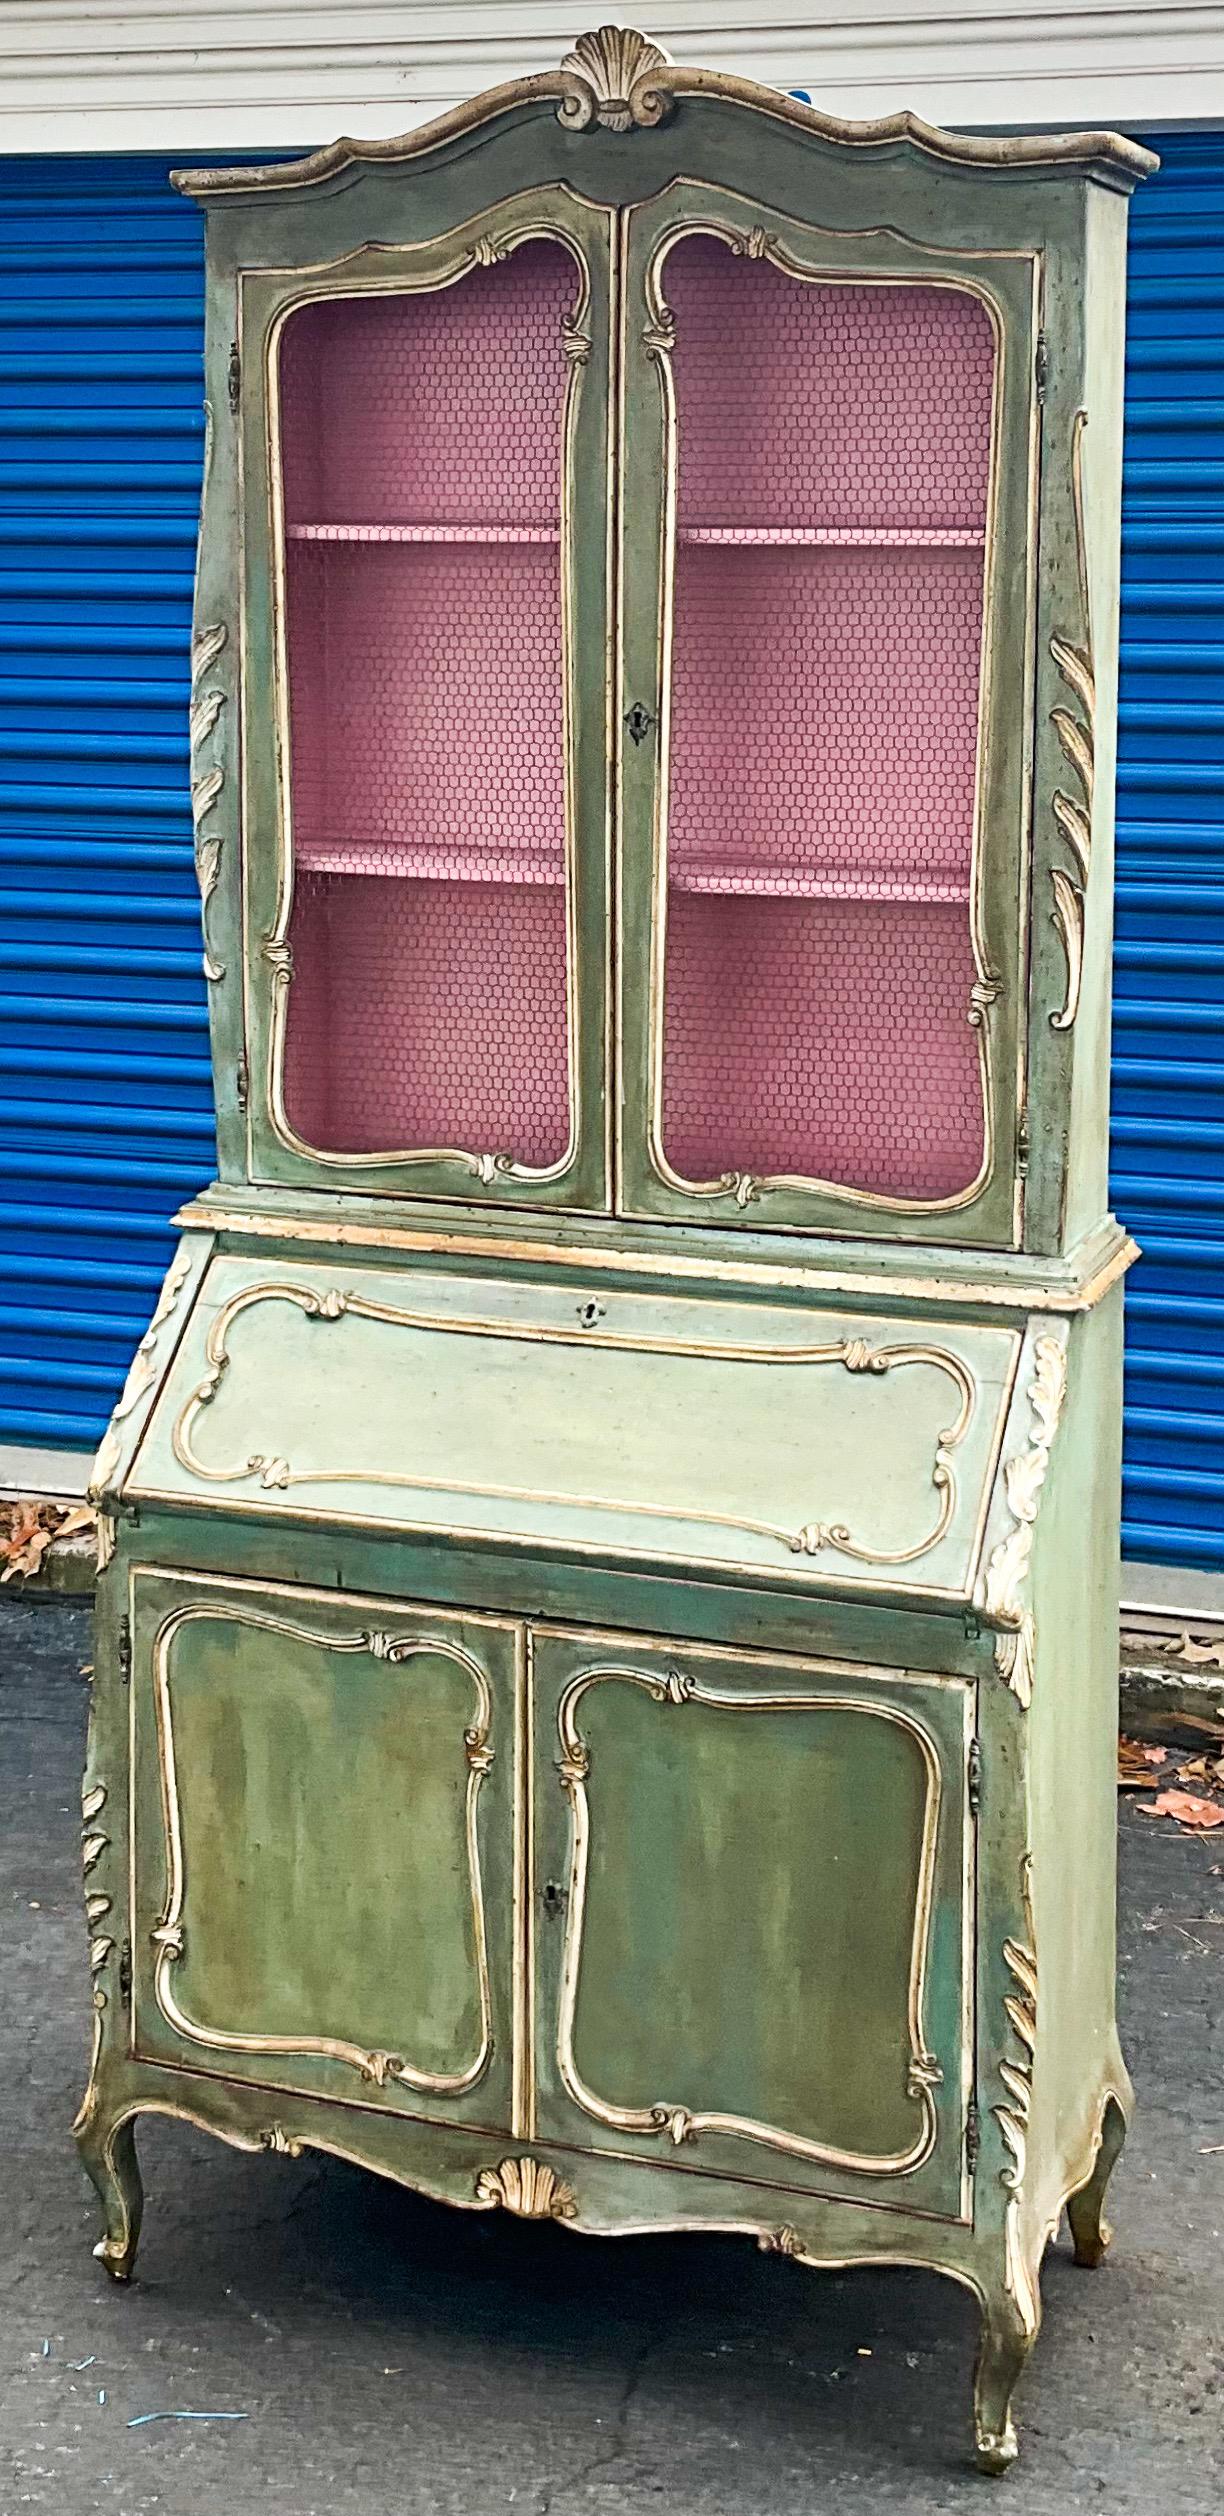 This is a lovely mid-century hand painted Italian Secretary with French styling. The top is 8”W. The interior is pink, and the wire front doors are in very good condition. The exterior is green with ivory accents. It is unmarked and in very good